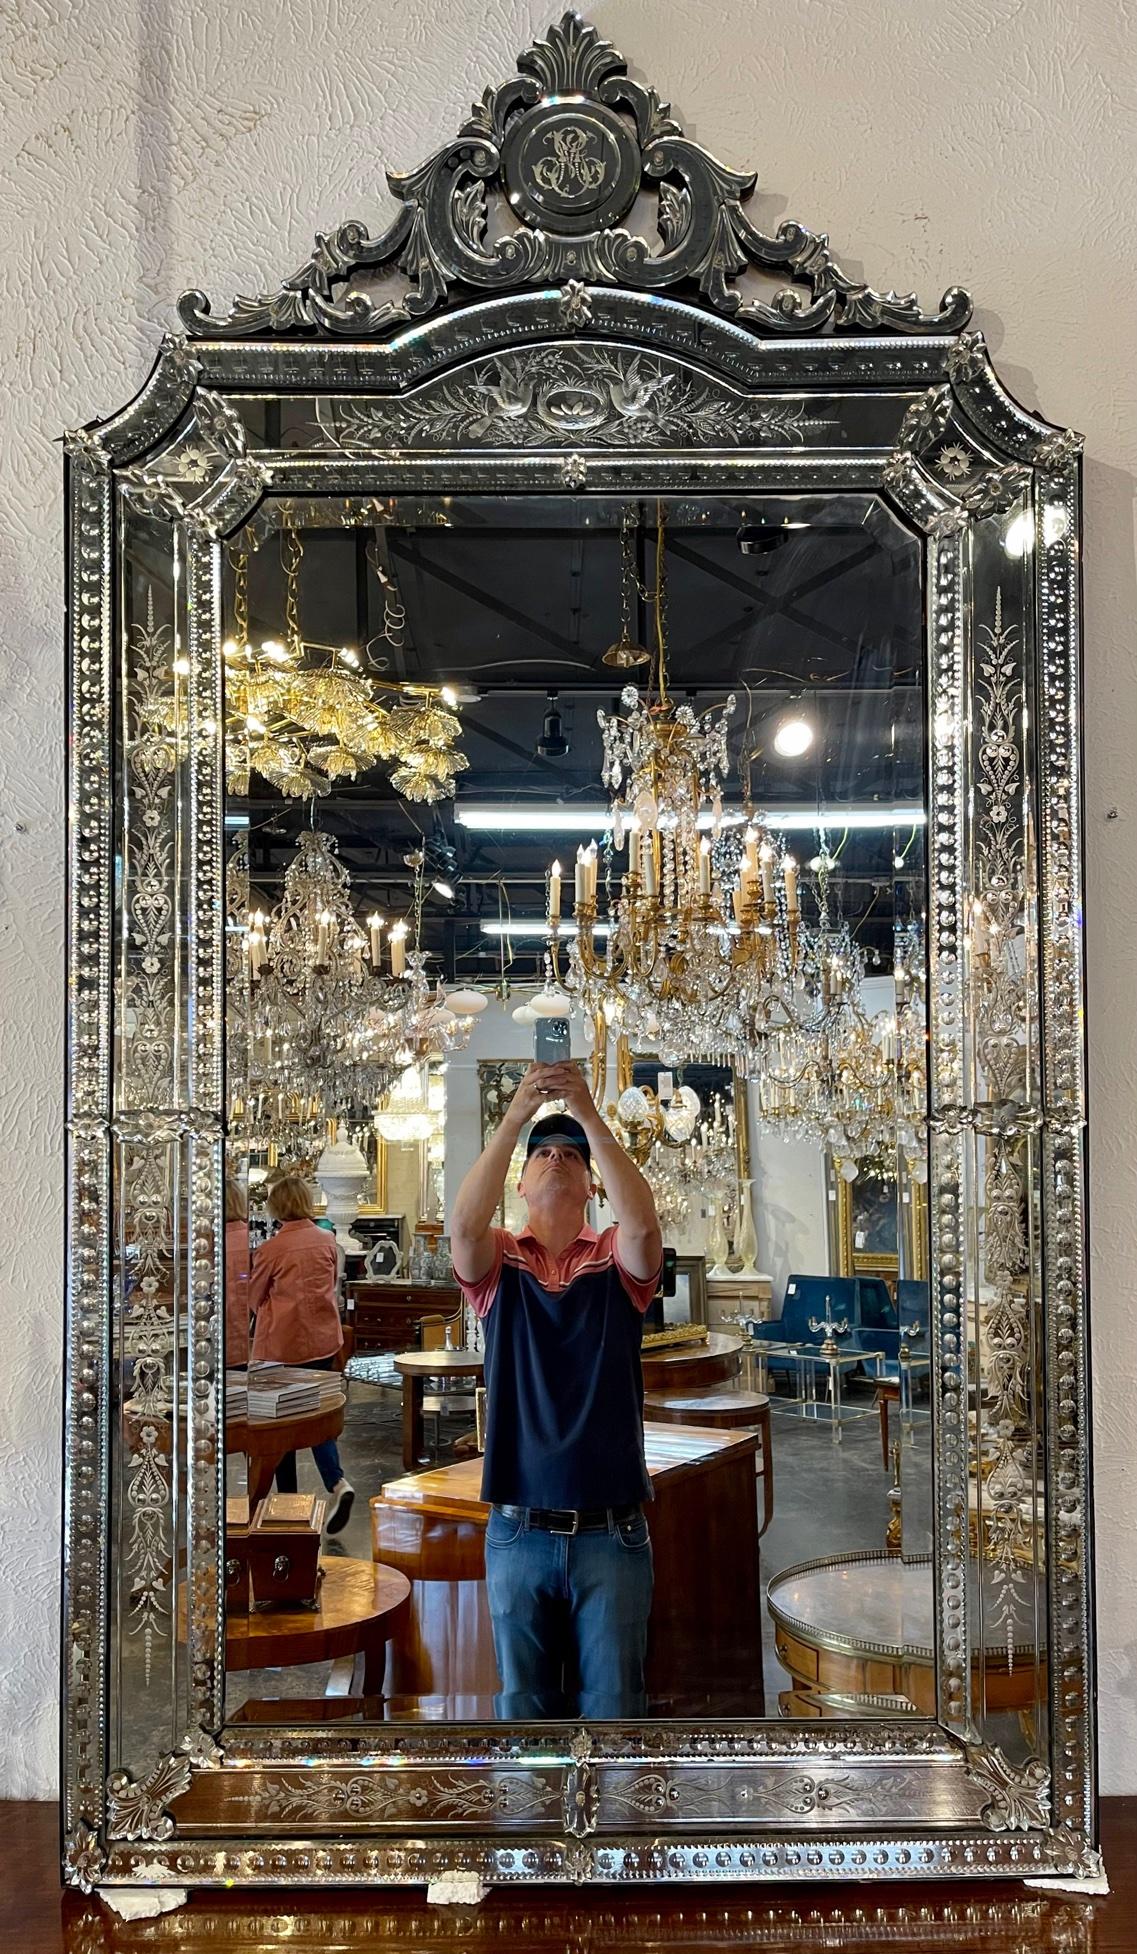 Outstanding late 19th century Italian venetian glass mirror. Circa 1880. A fine addition to any home!